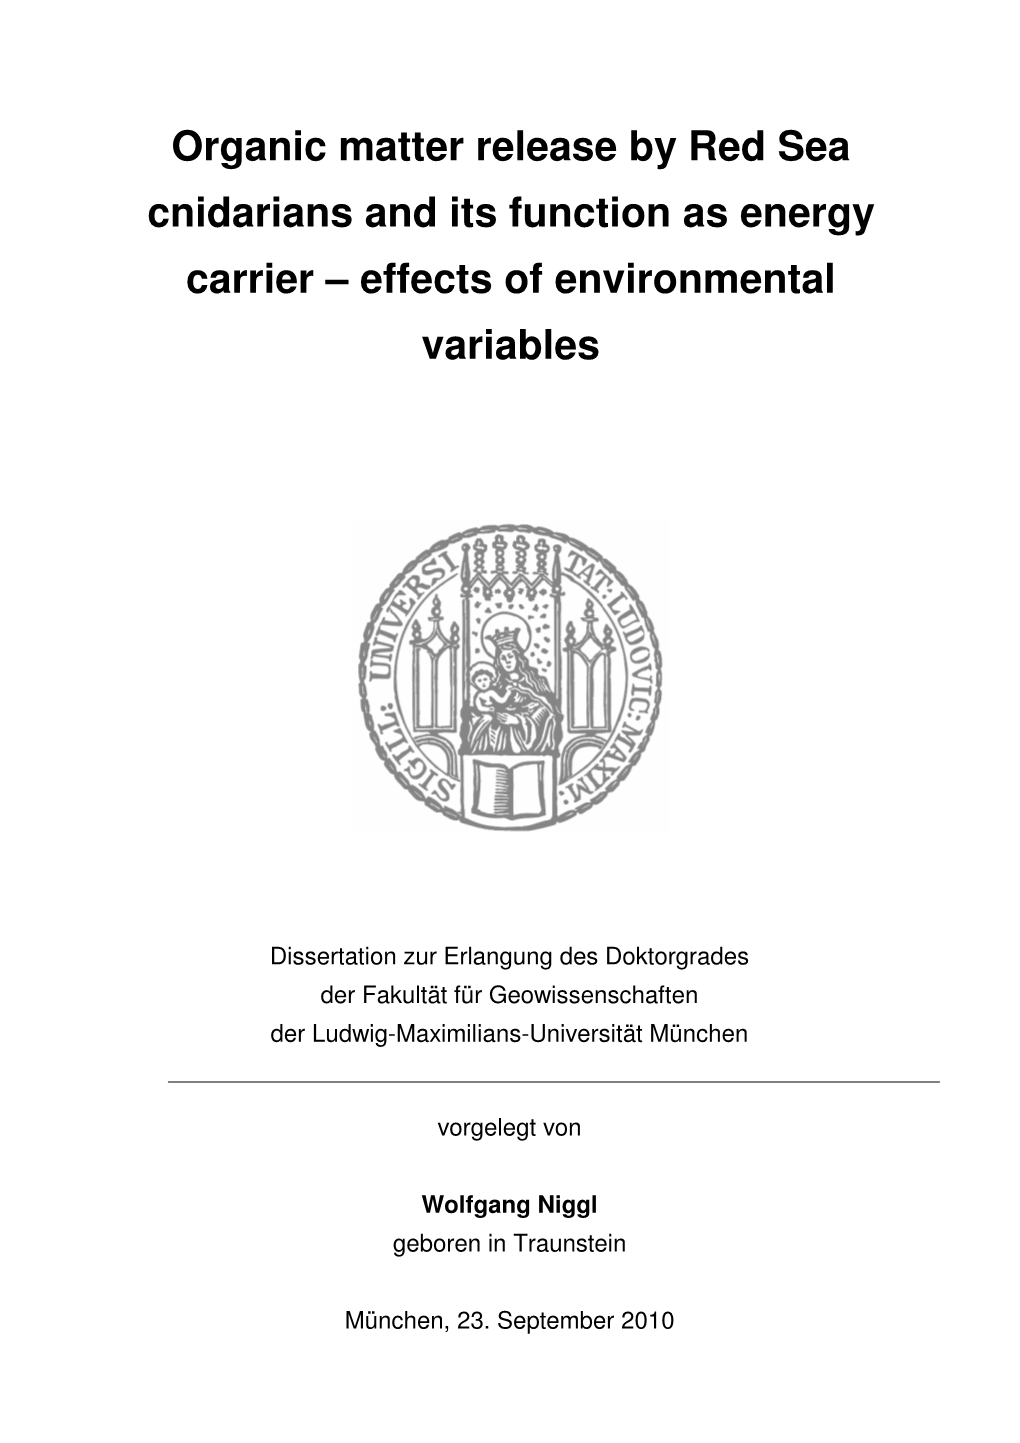 Organic Matter Release by Red Sea Cnidarians and Its Function As Energy Carrier – Effects of Environmental Variables